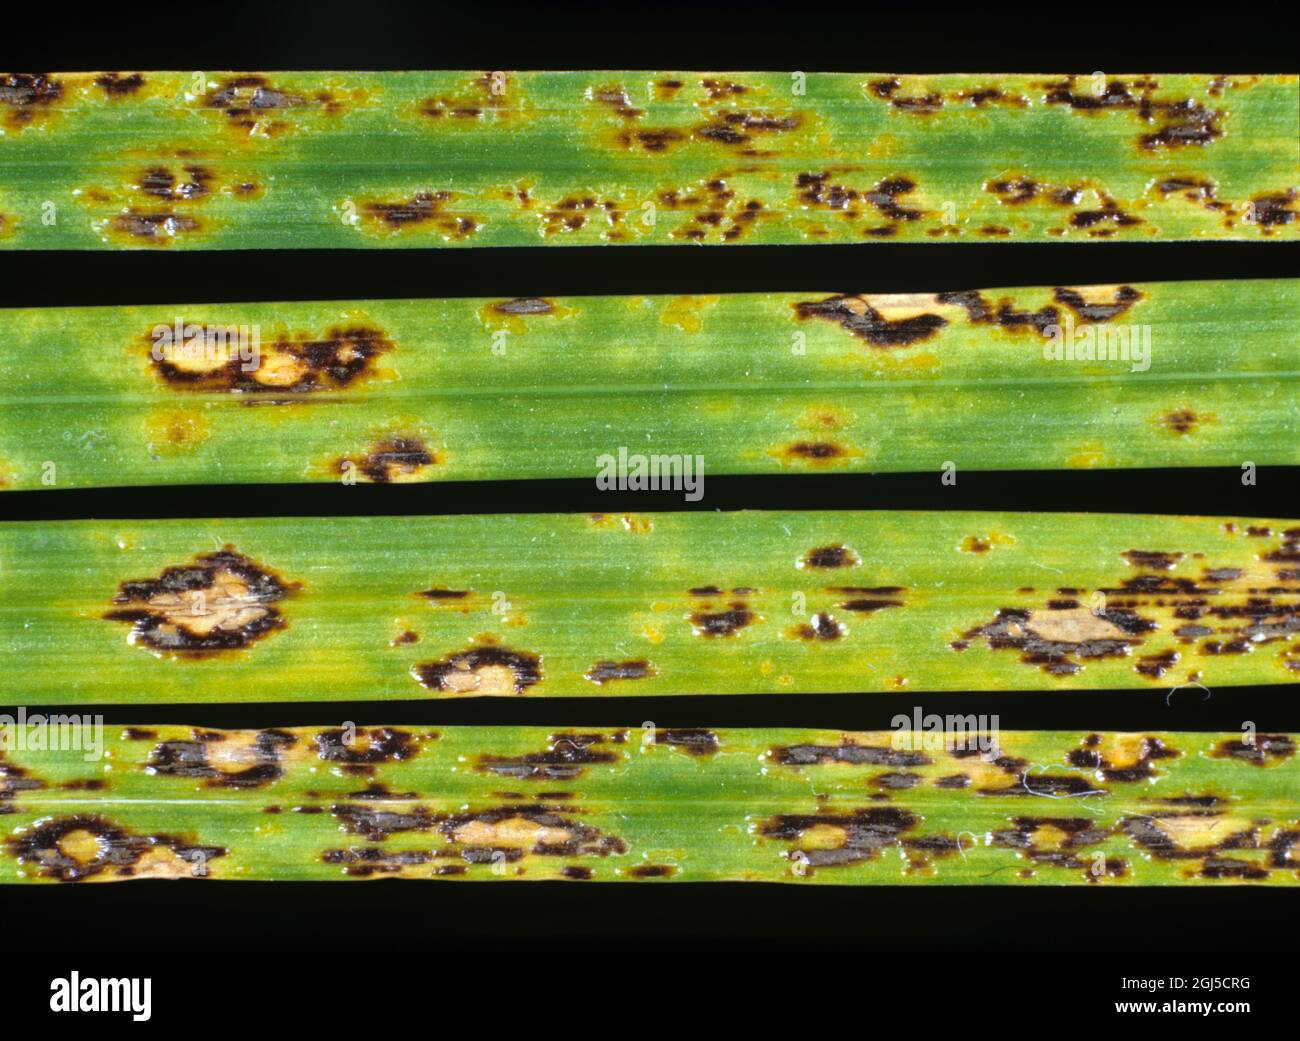 Tarpot (Phyllachora graminis) dark circular necrotic ring shaped  lesions with light centres  of a fungal disease on ryegrass Lolium sp. leaves Stock Photo